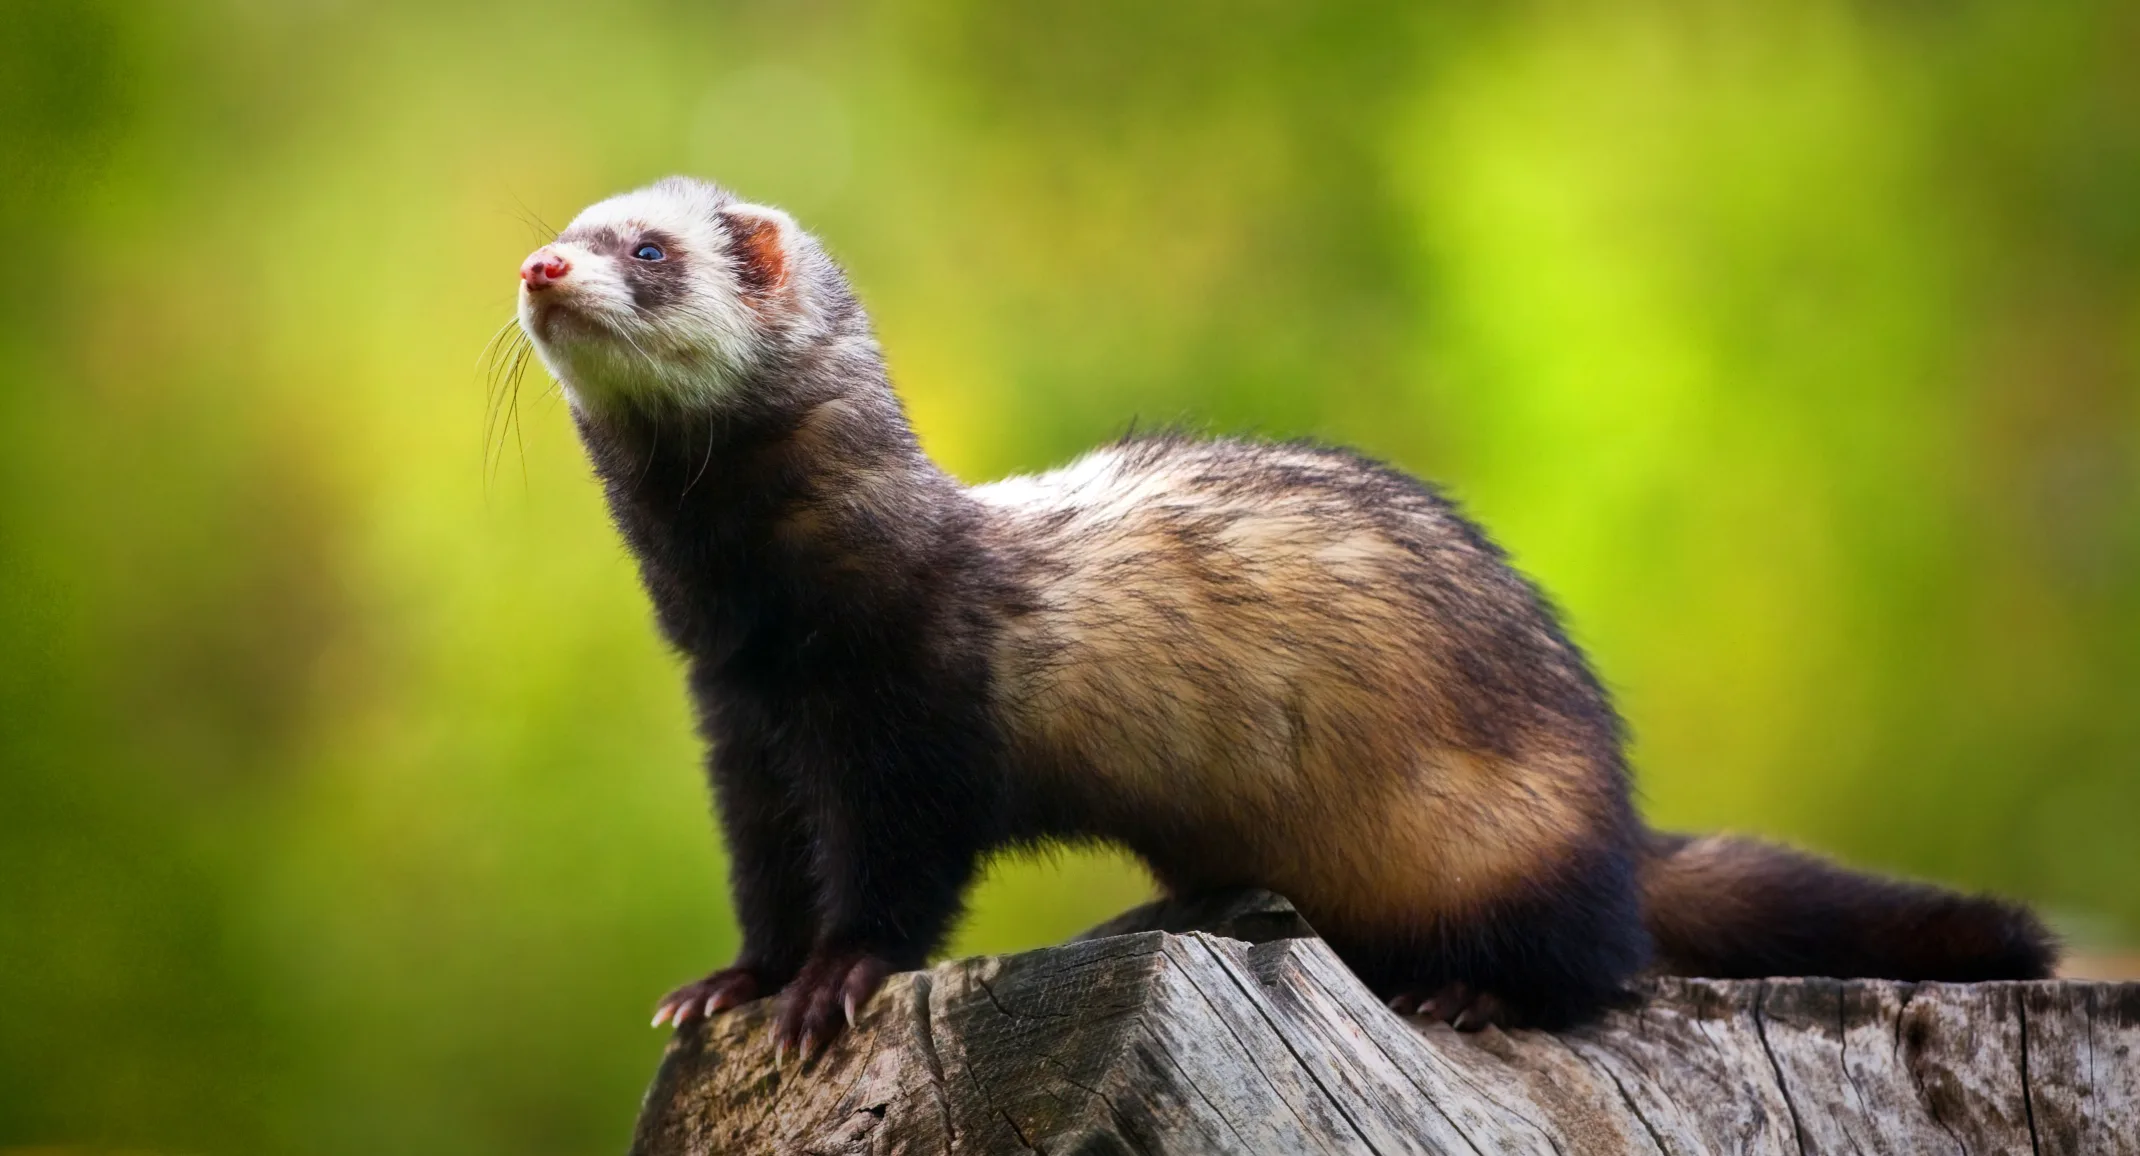 Ferret standing on wood with green background